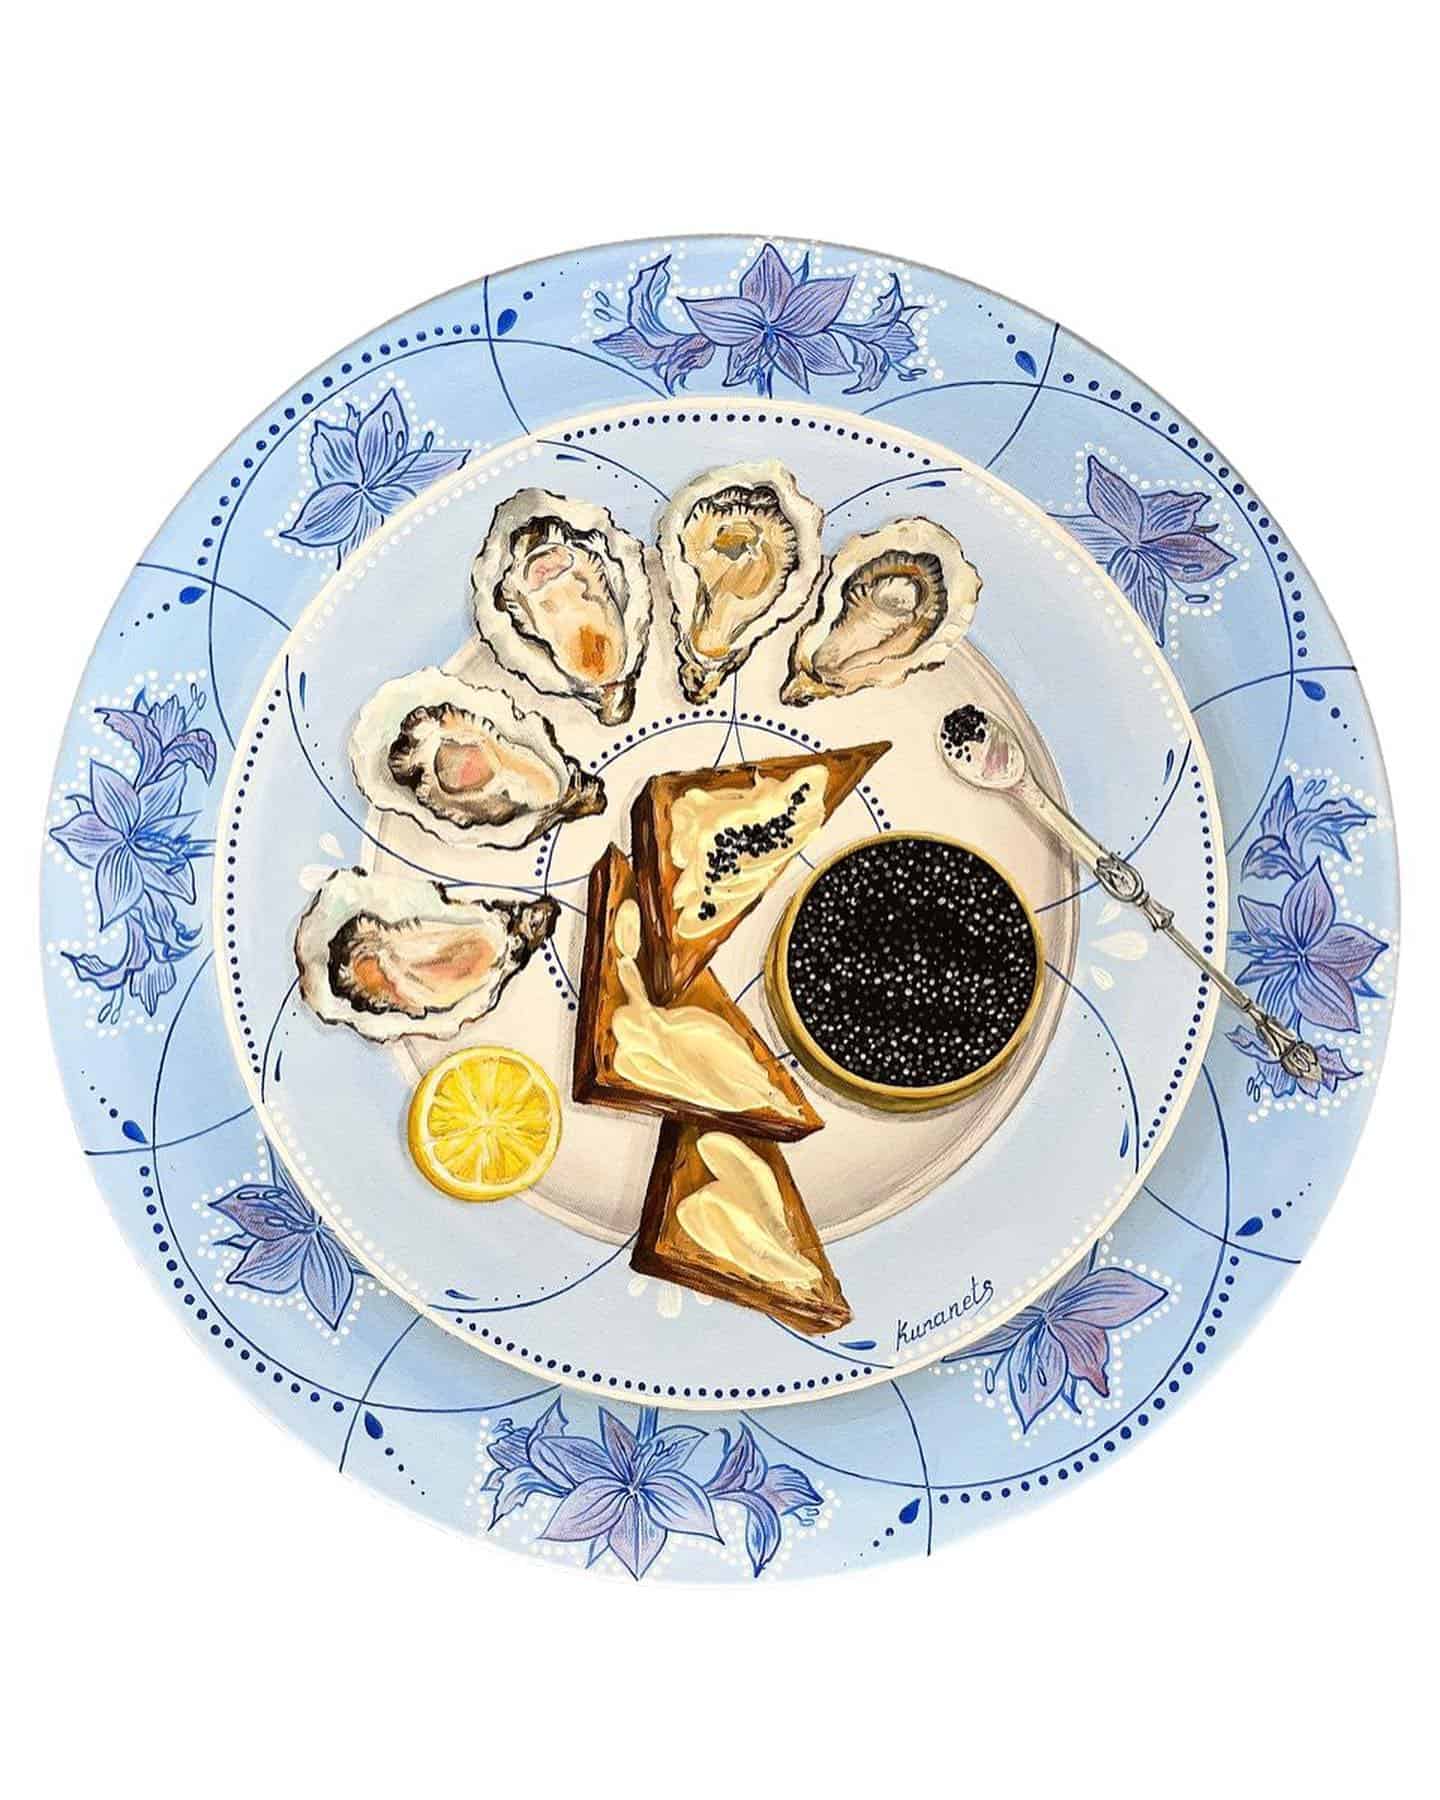 oil painting of caviar and oysters